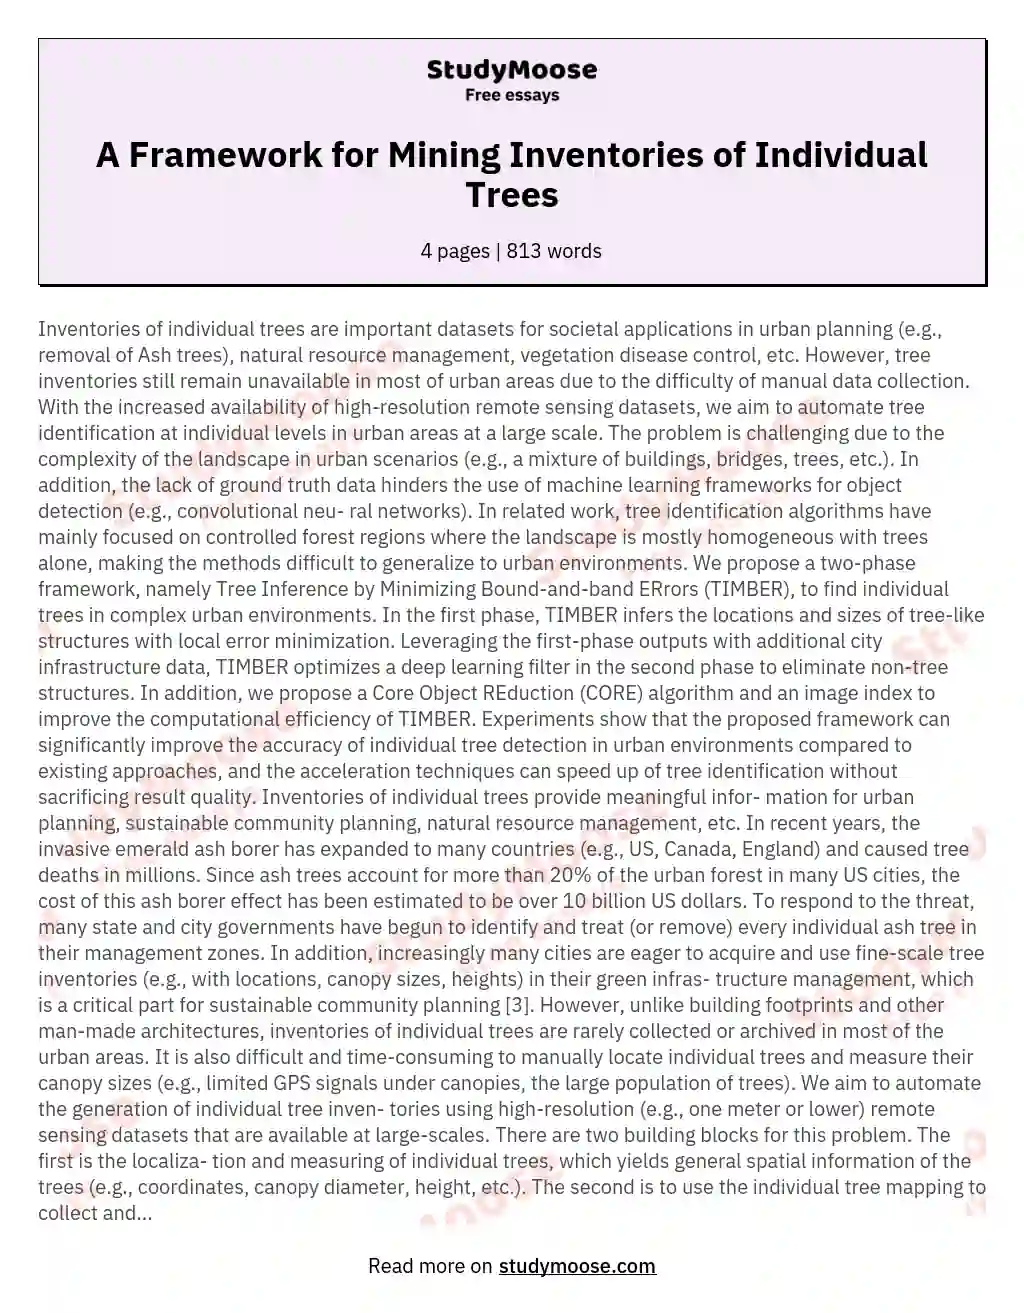 A Framework for Mining Inventories of Individual Trees essay